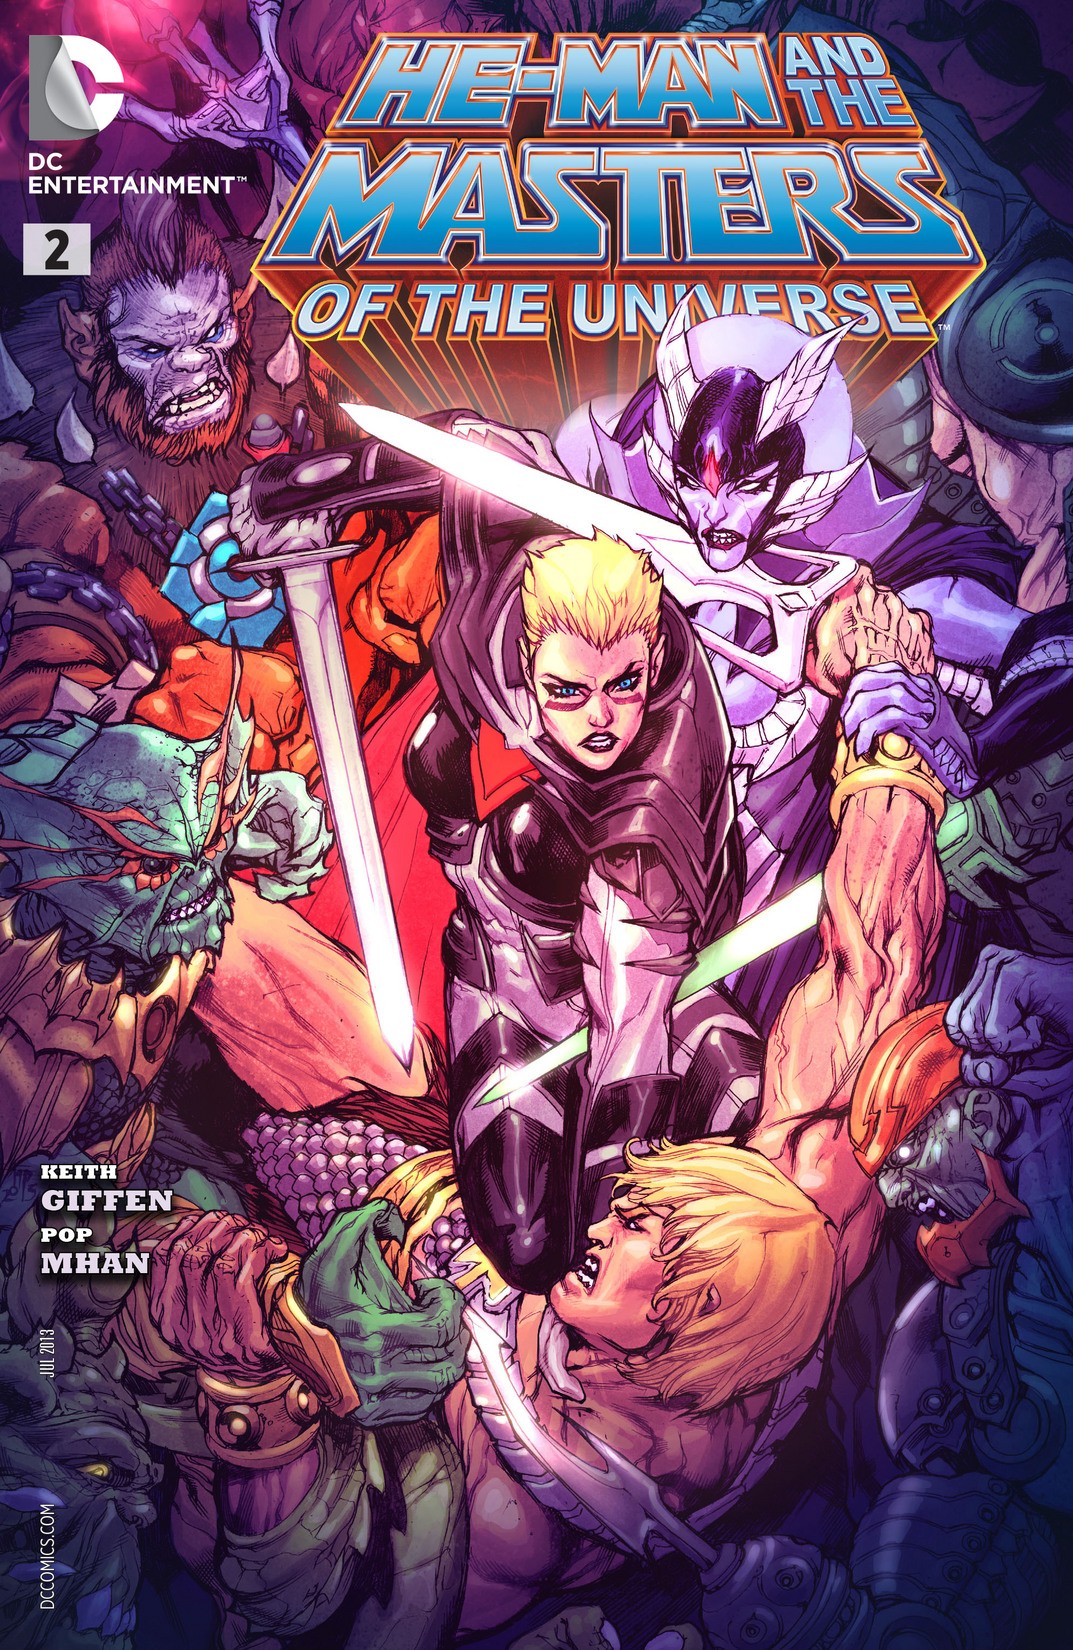 He-Man and the Masters of the Universe Vol. 2 #2